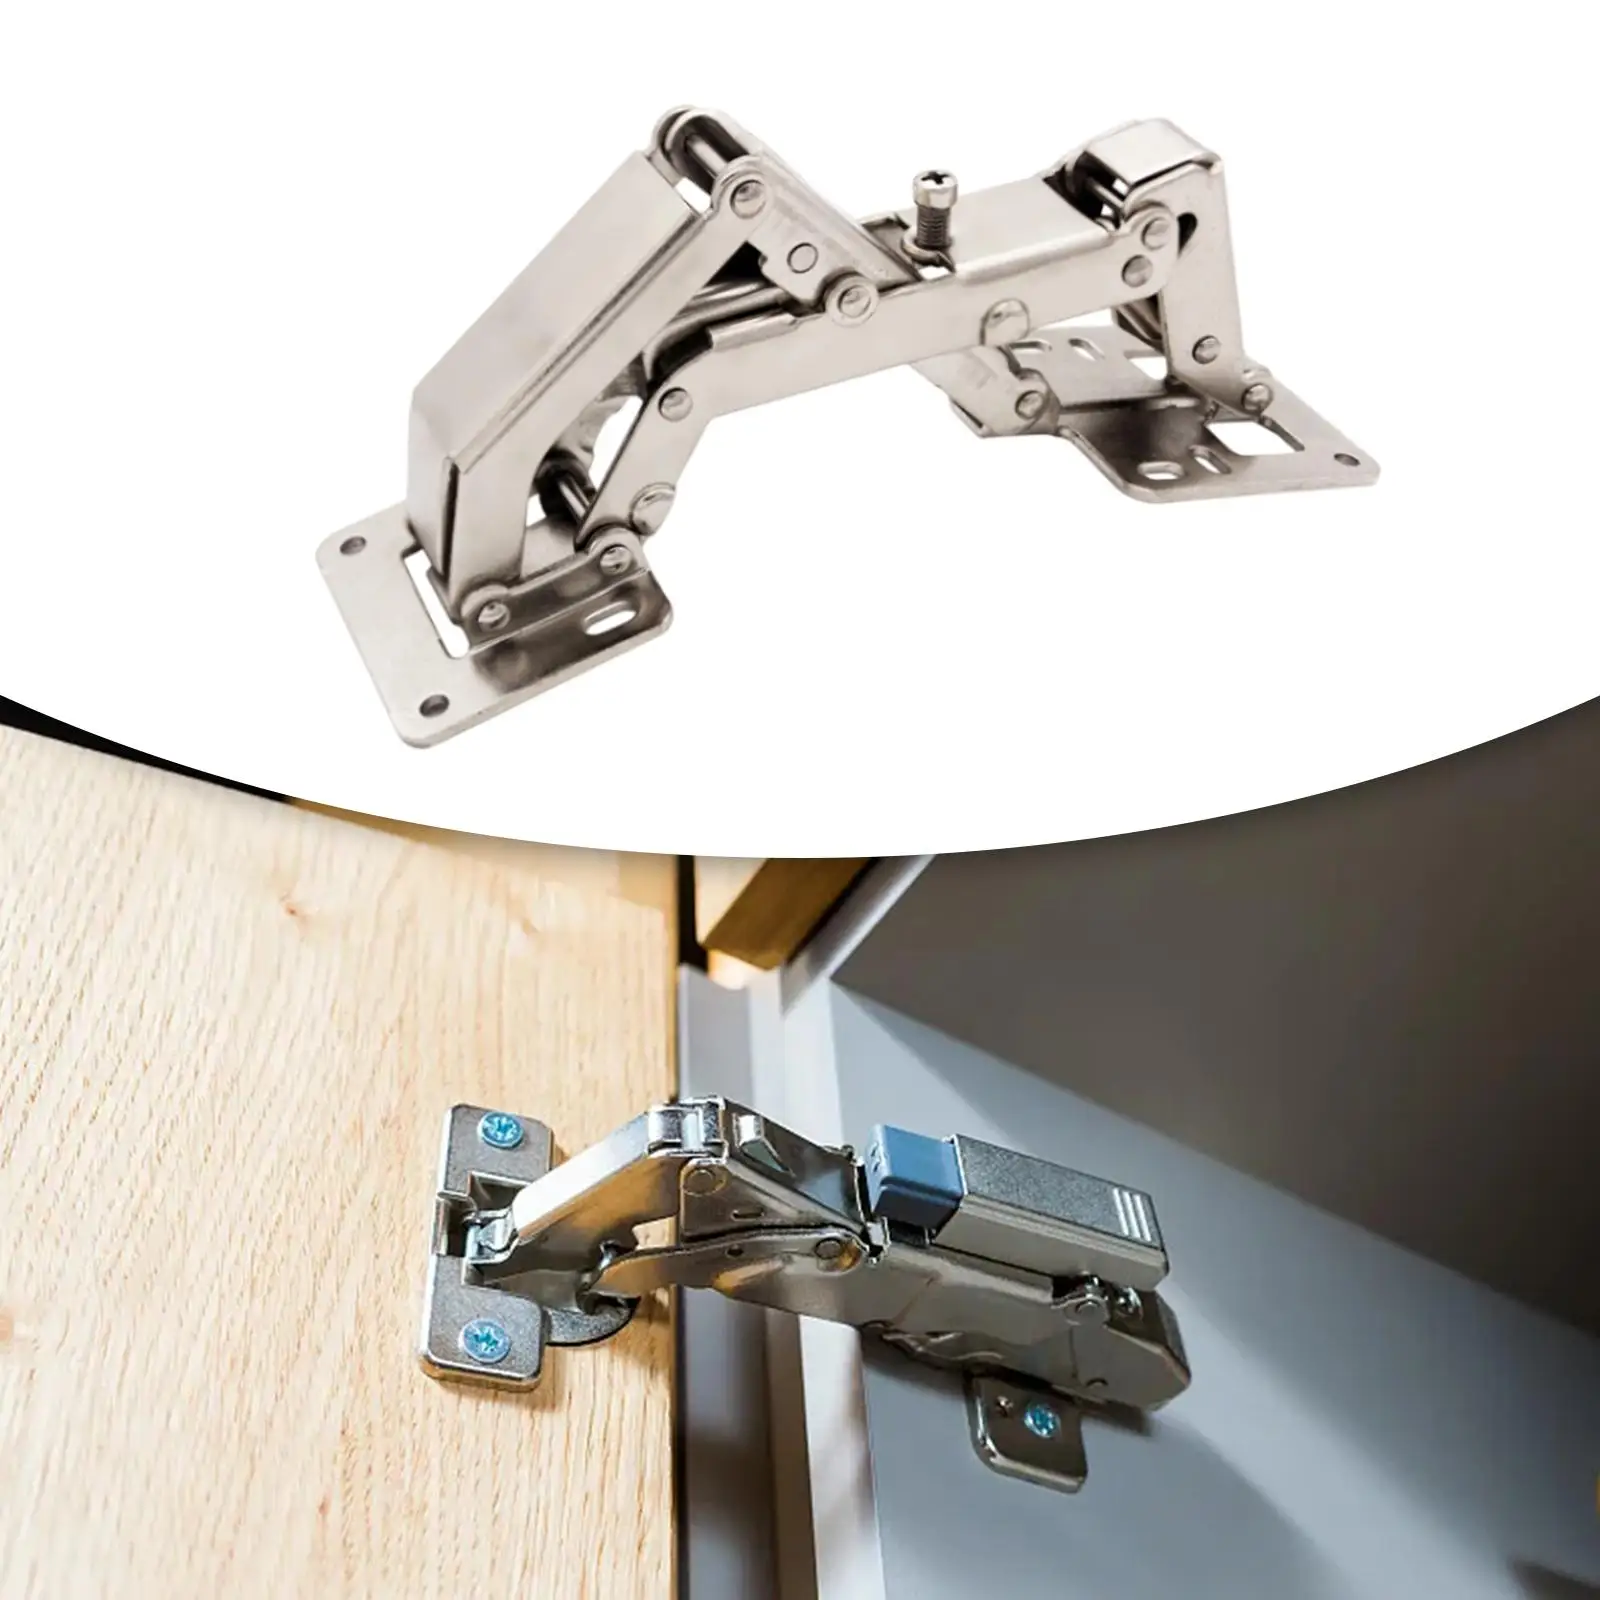 180 Degree Hidden Hinges Frameless Cabinet Hinges Easy to Install Soft Close